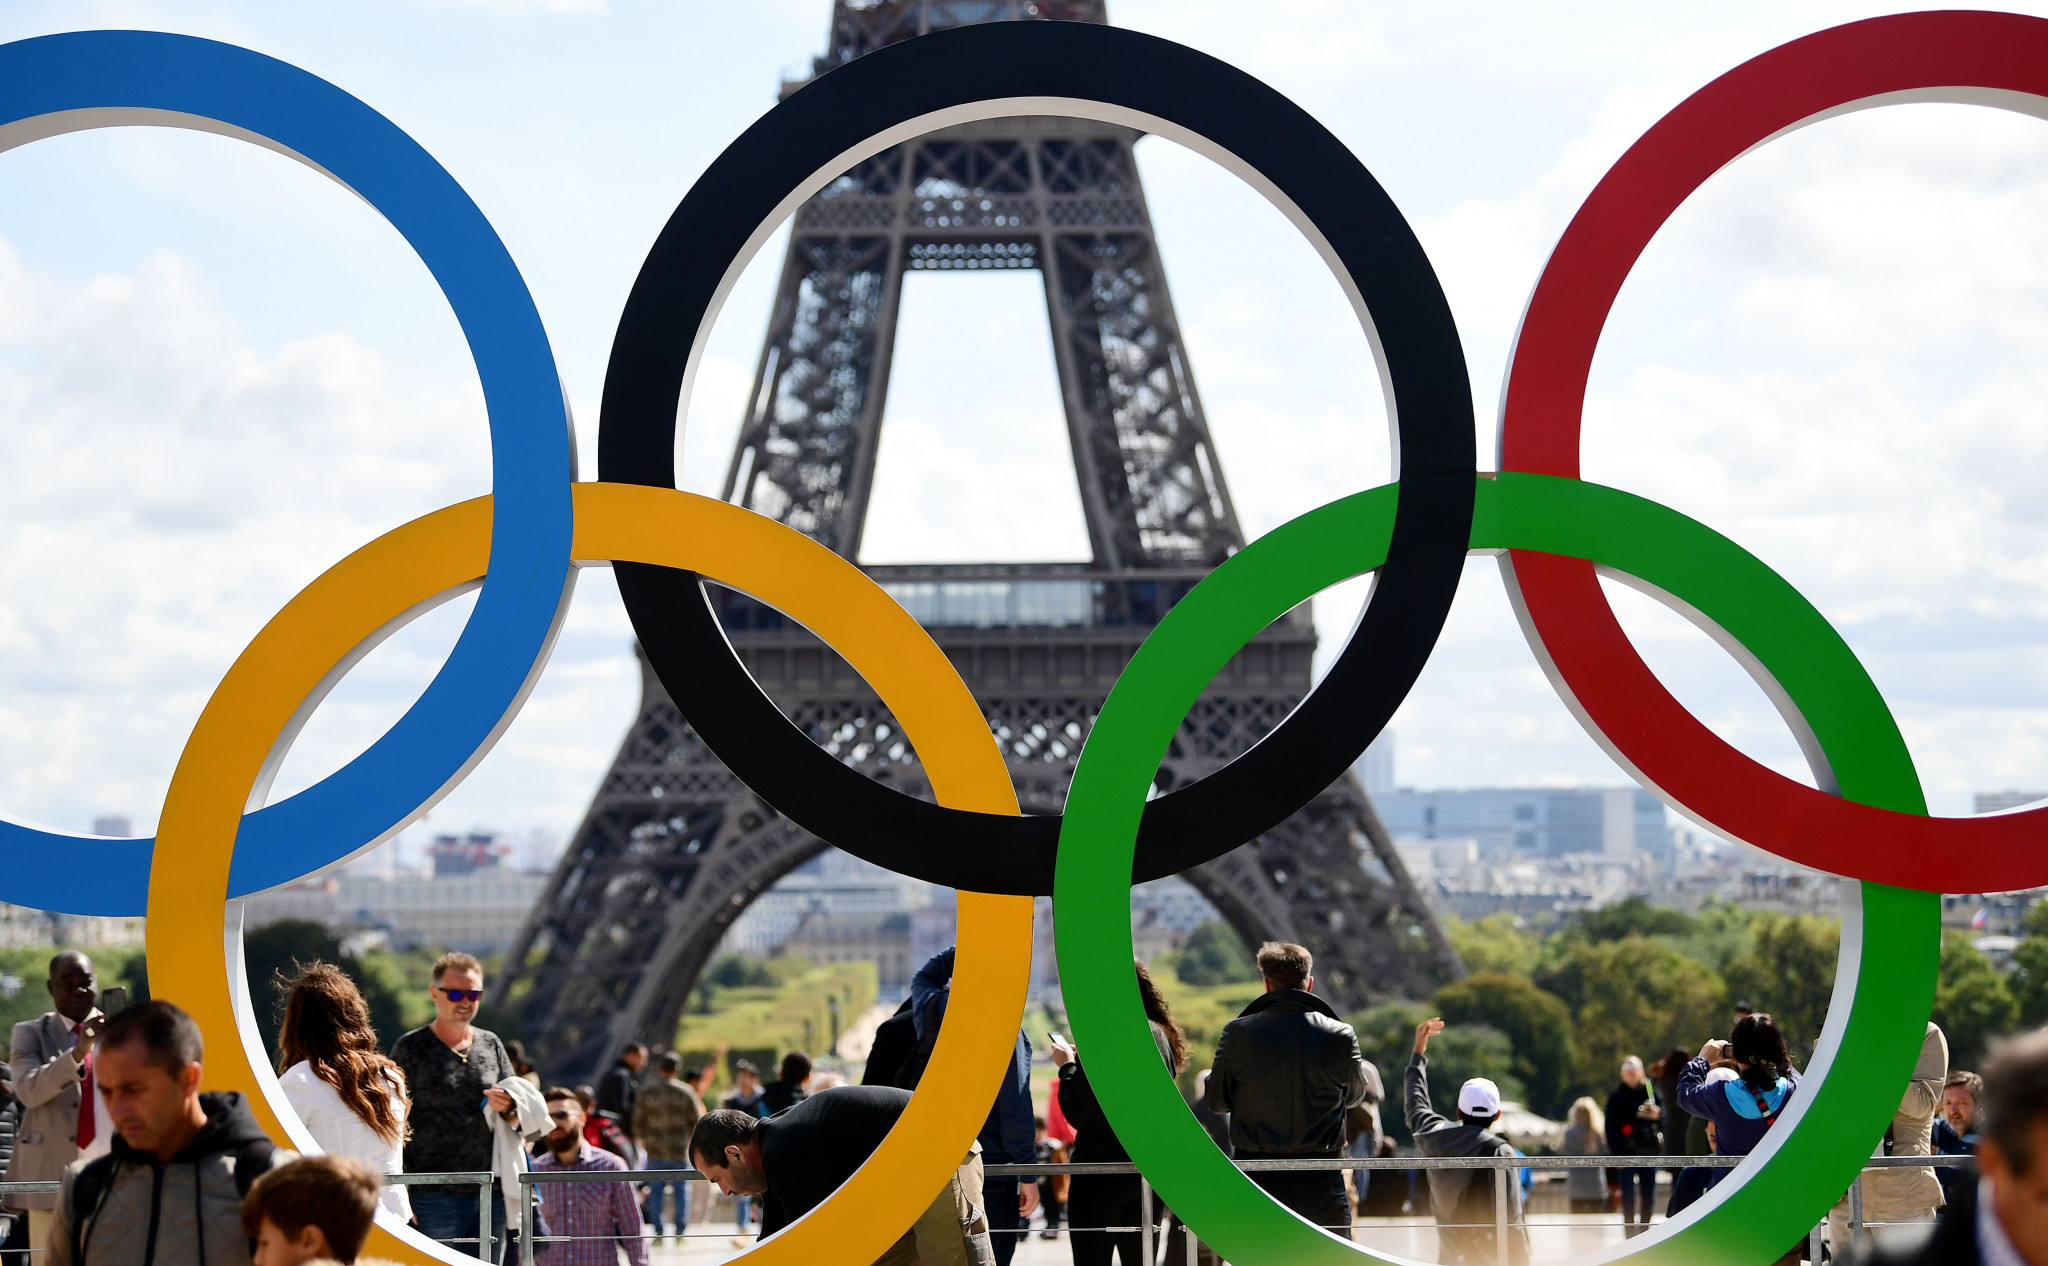 French authorities have predicted a total cost of nearly nine billion euros for the Paris Games. GETTY IMAGES